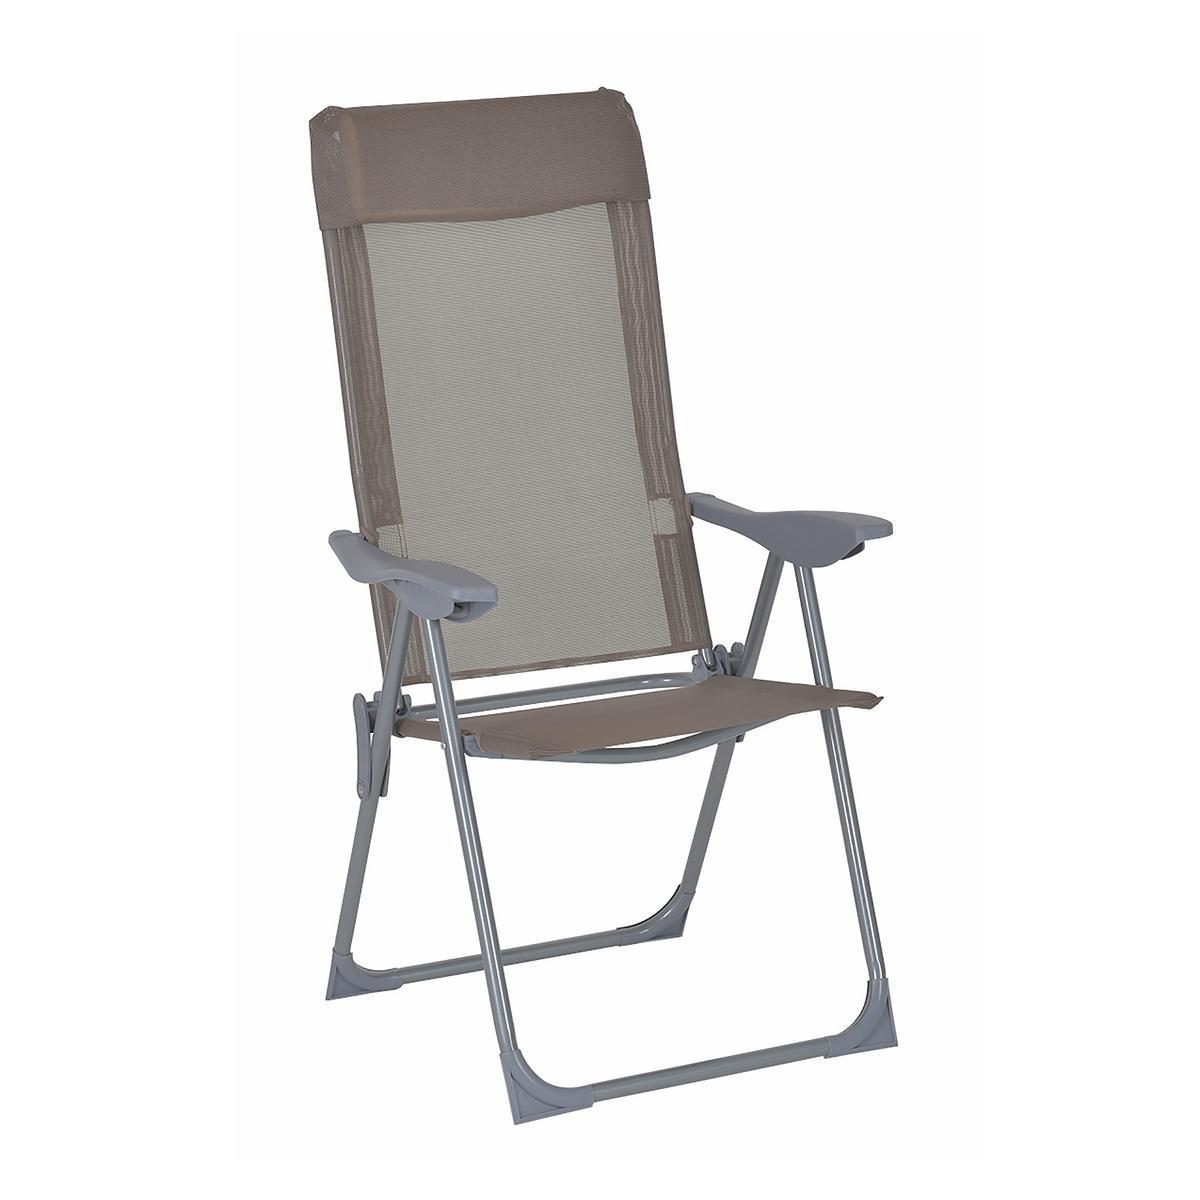 Fauteuil relax - 60 x 68 x H 108 cm